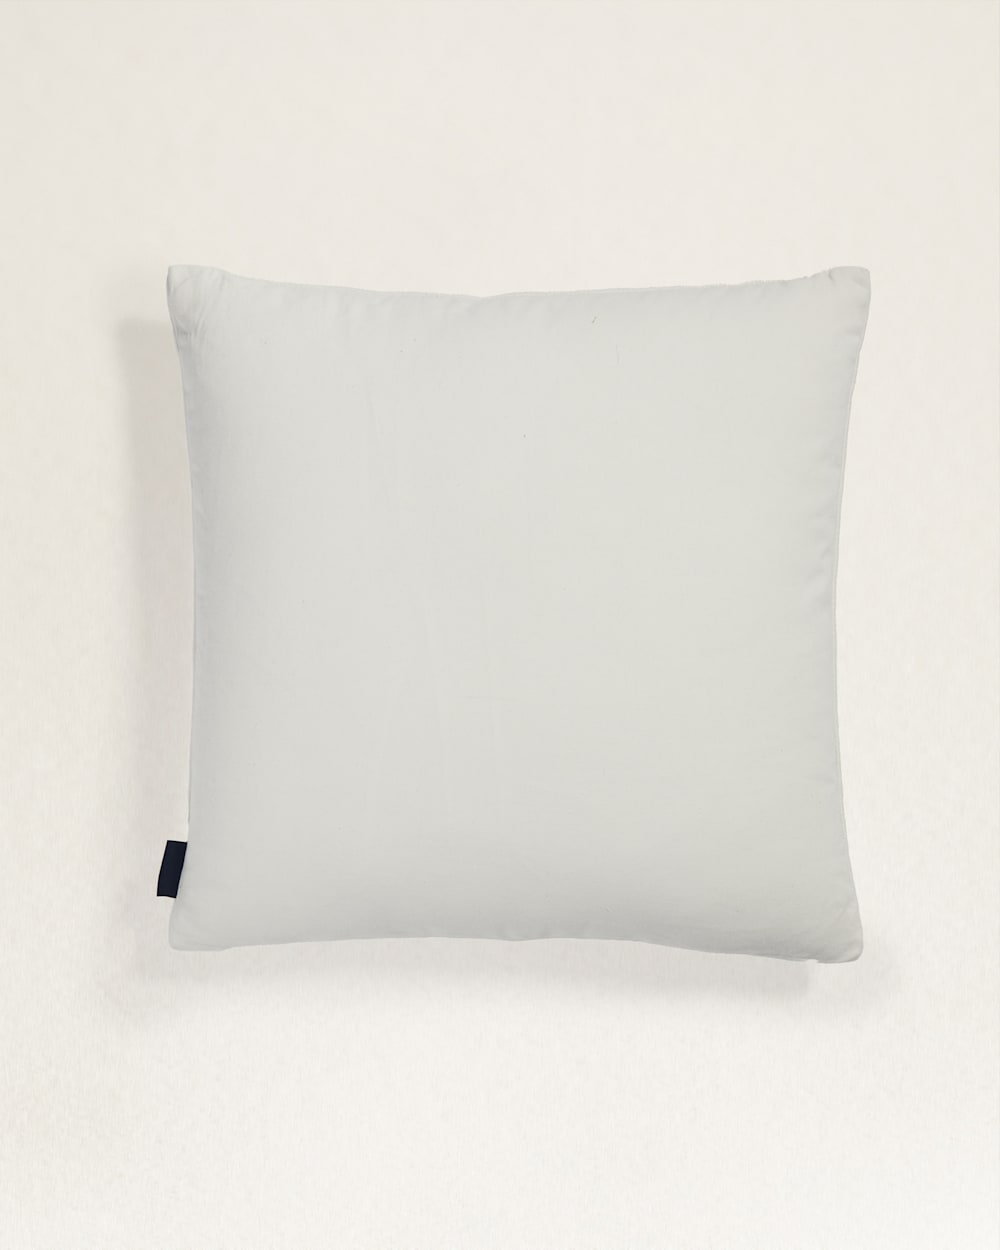 ALTERNATE VIEW OF CABIN CREEK SQUARE PILLOW IN MARSHMALLOW image number 3